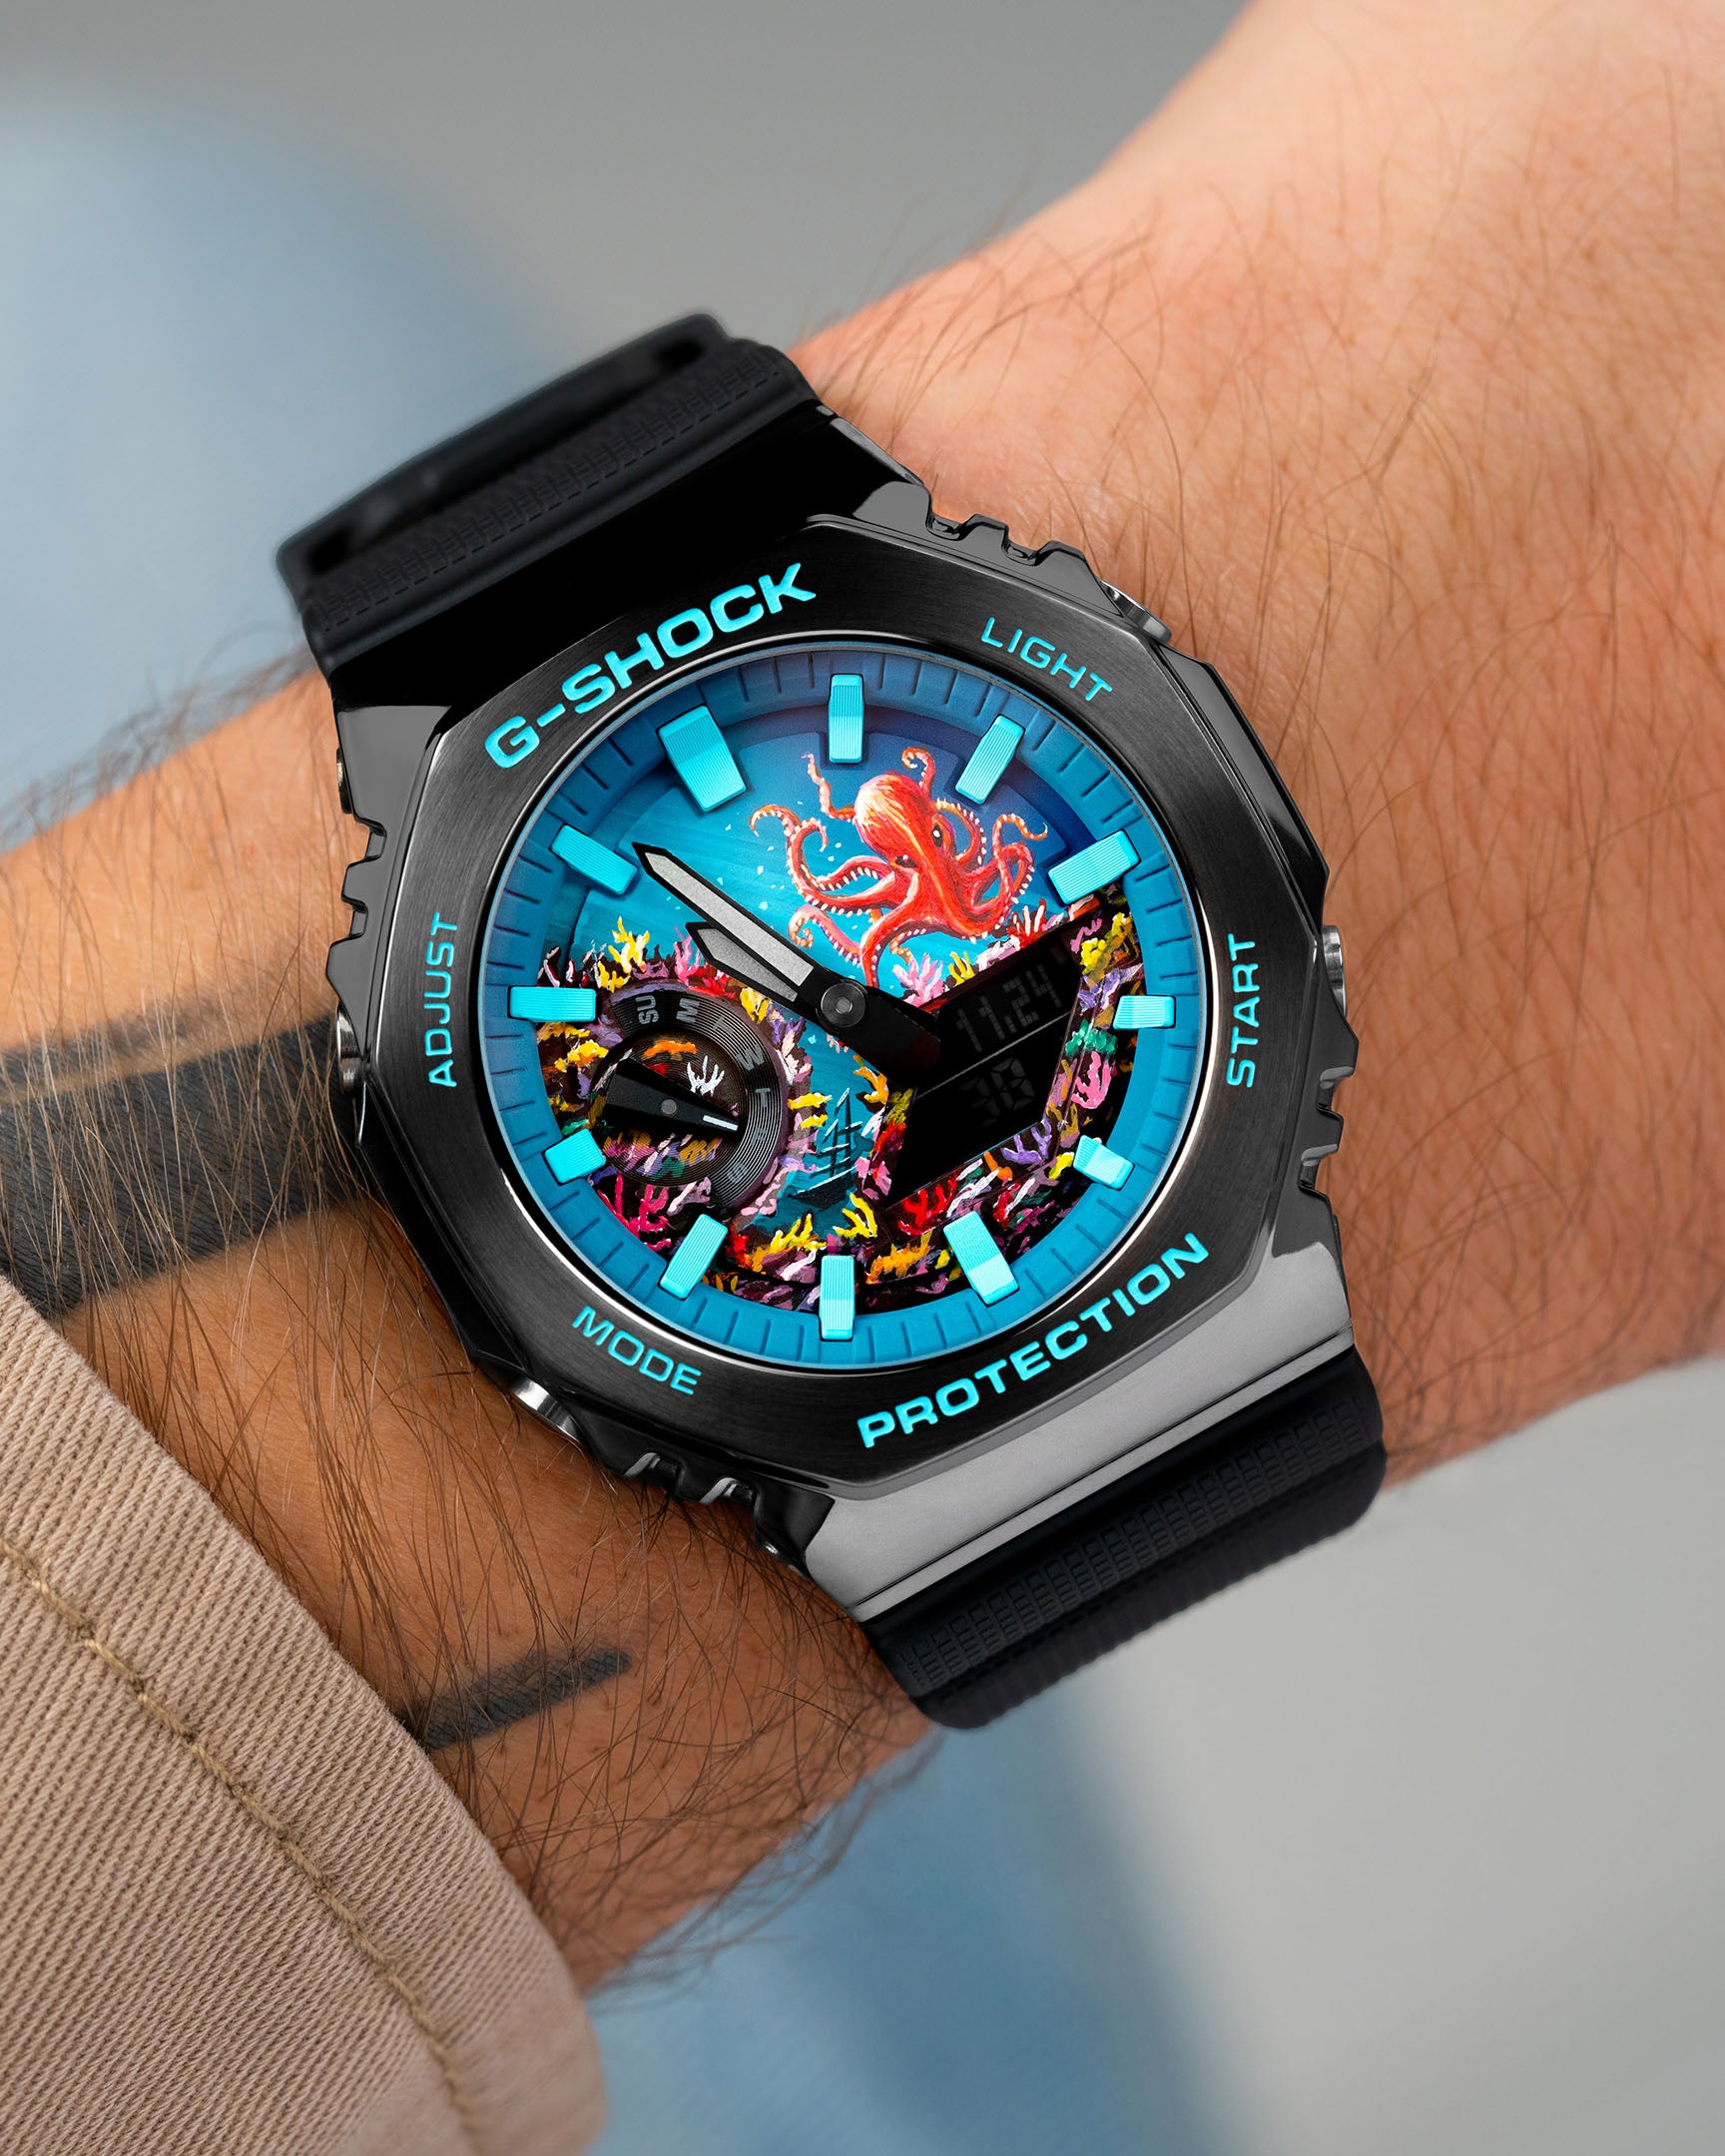 G-Shock CasiOak Octo Limited Edition